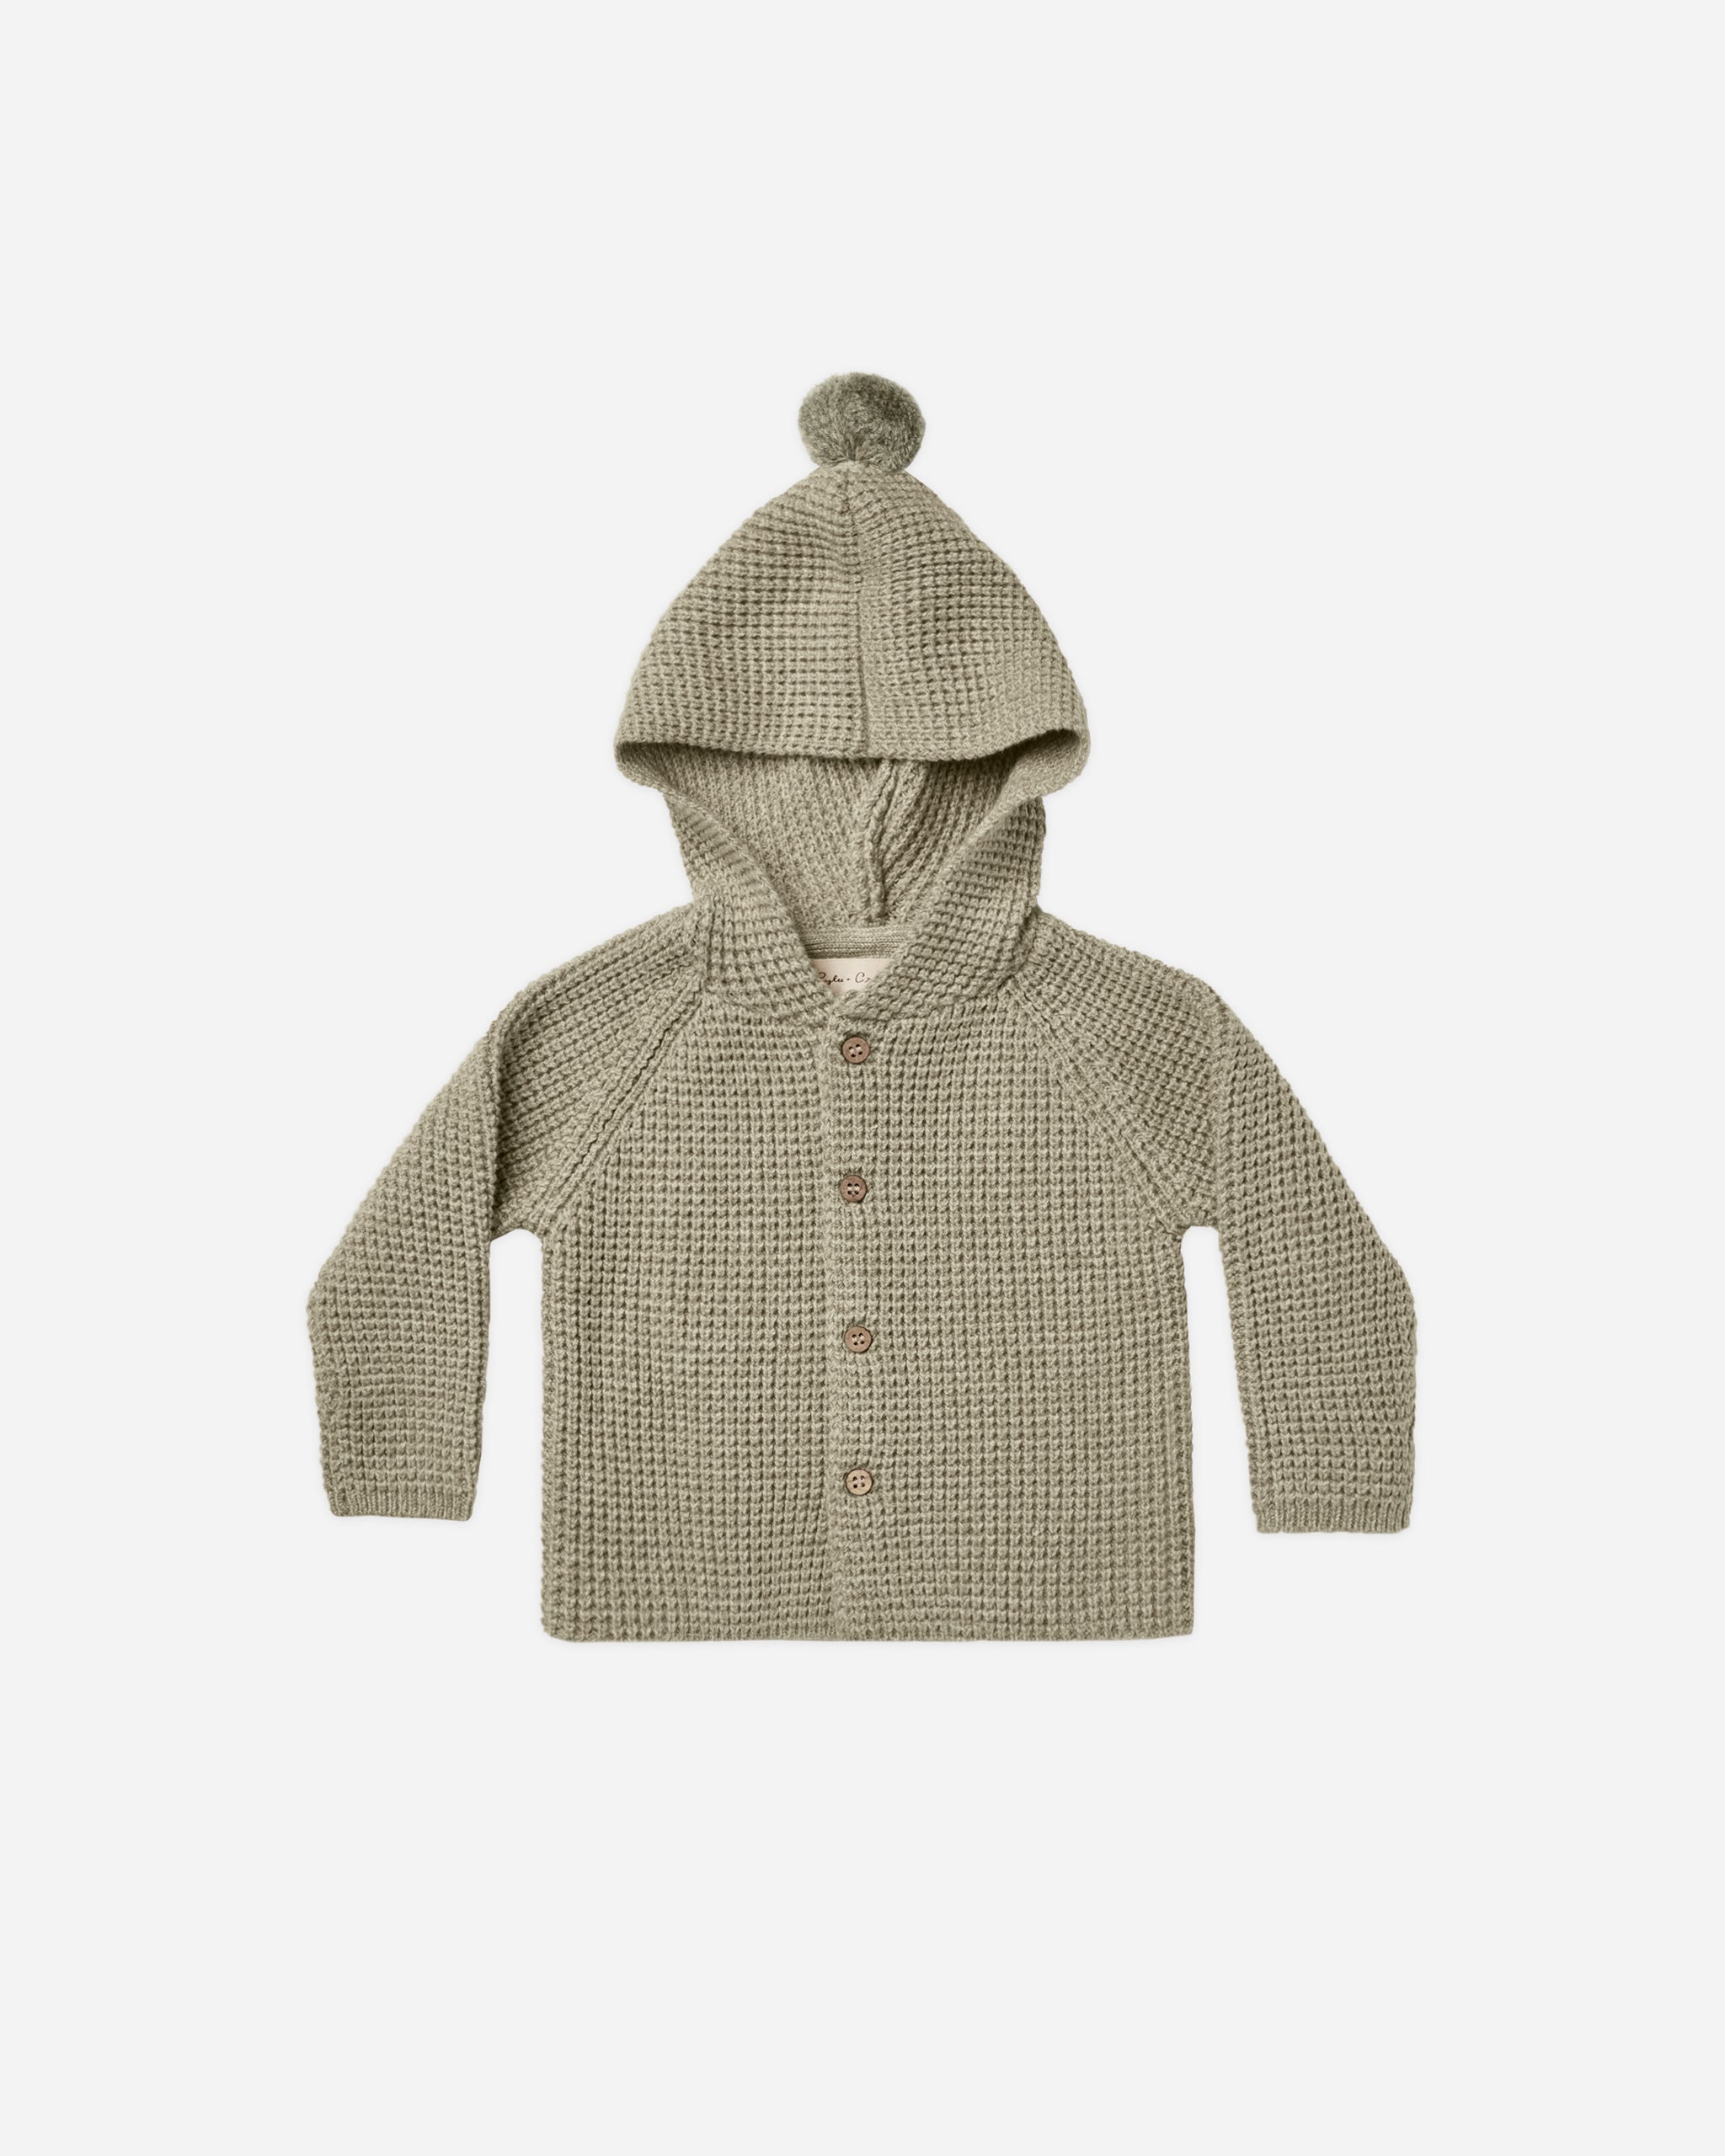 Tassle Cardigan | Heathered Fern - Rylee + Cru | Kids Clothes | Trendy Baby Clothes | Modern Infant Outfits |